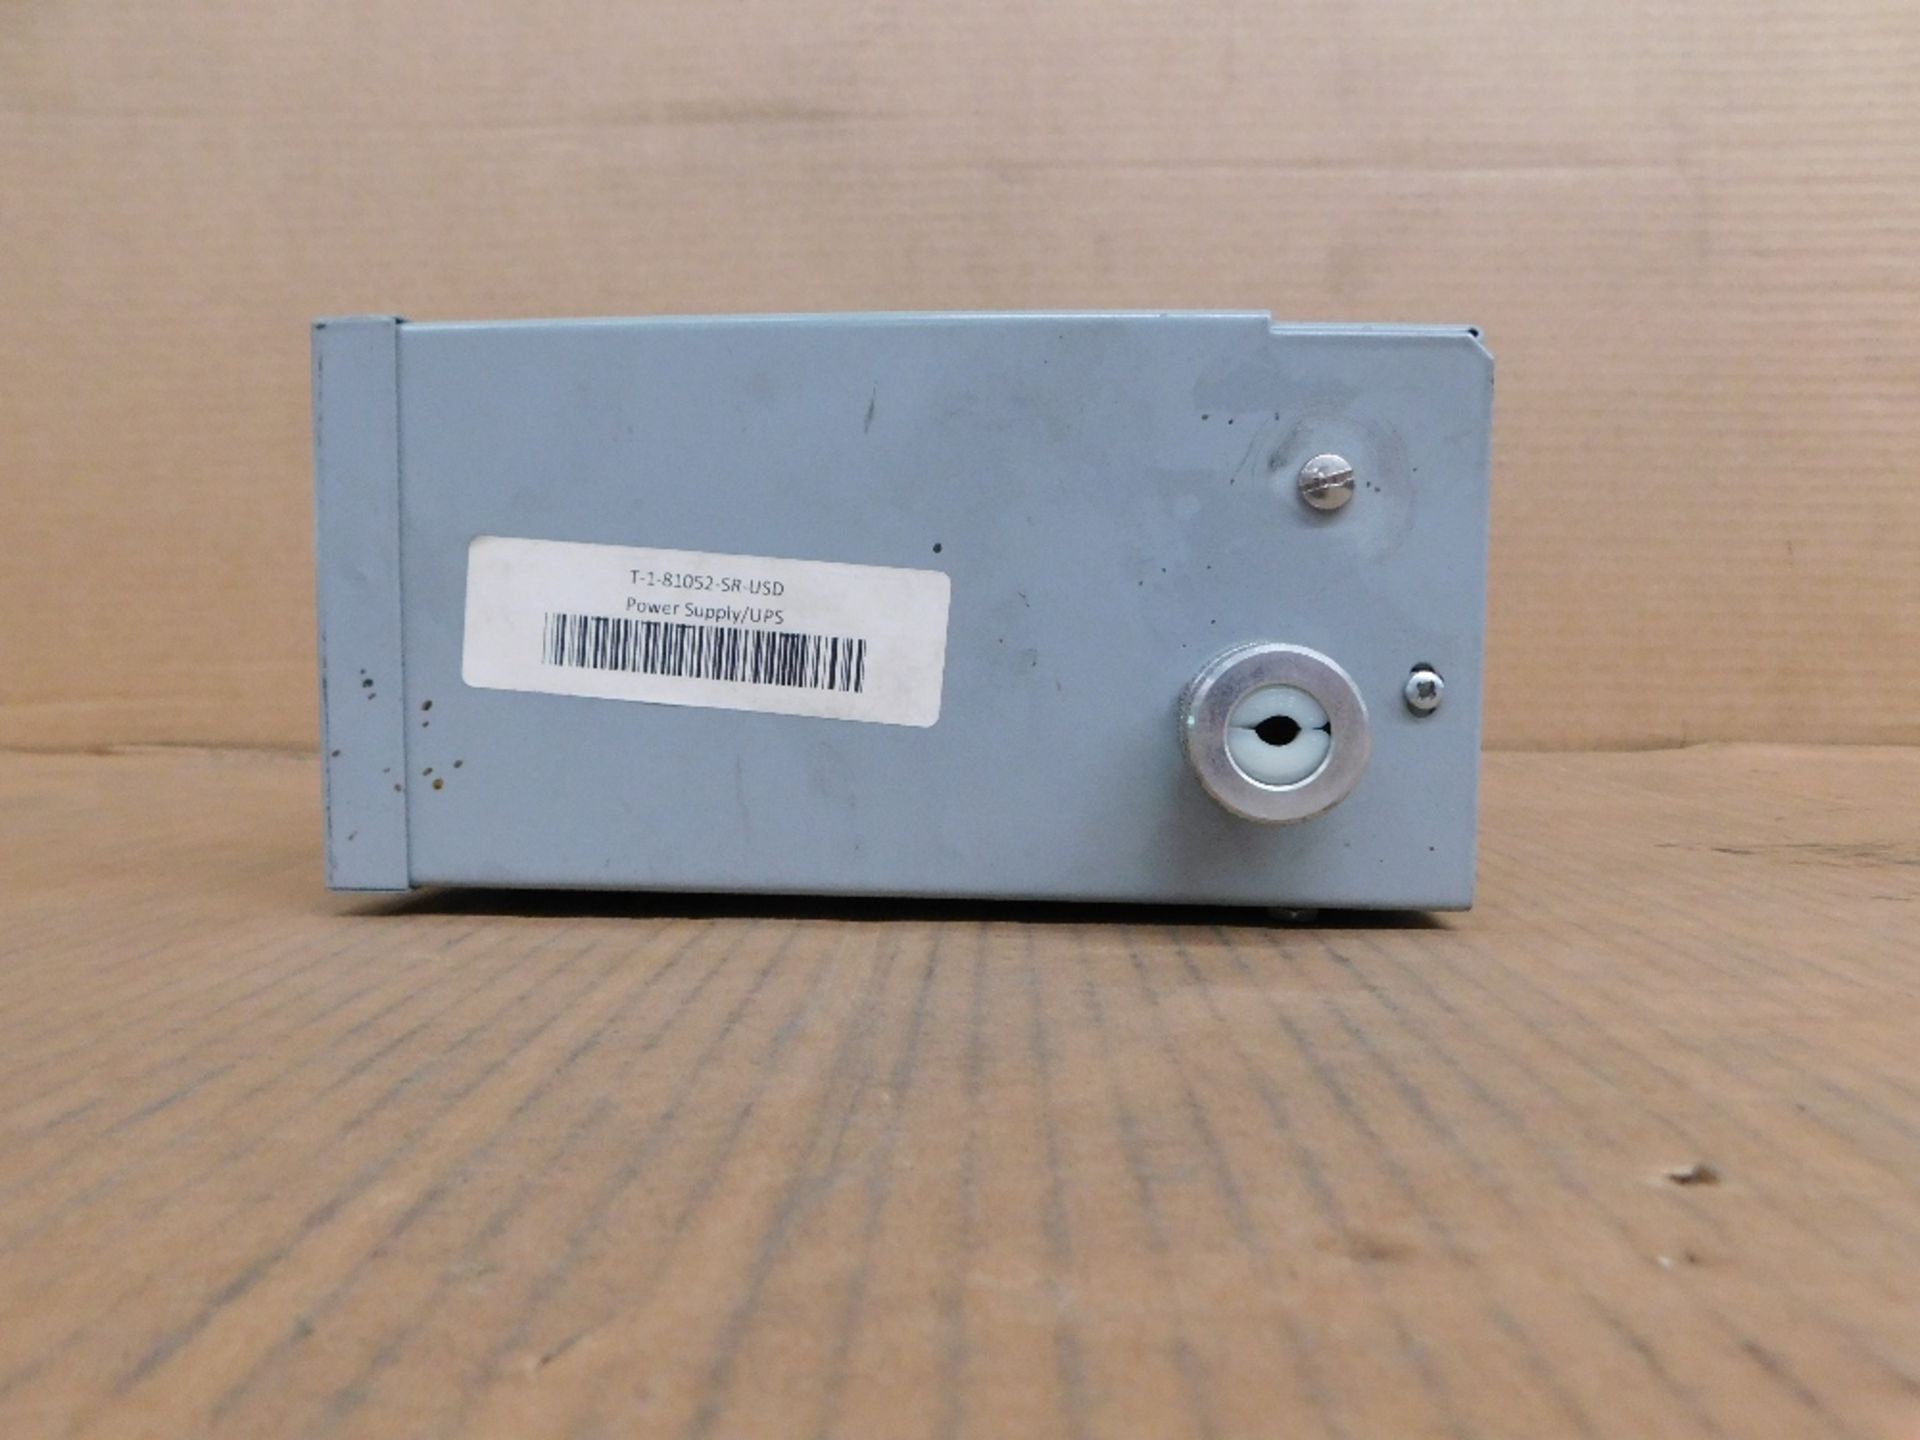 5x Acuity Controls, Exair, Acme Power Supplies - Image 18 of 25